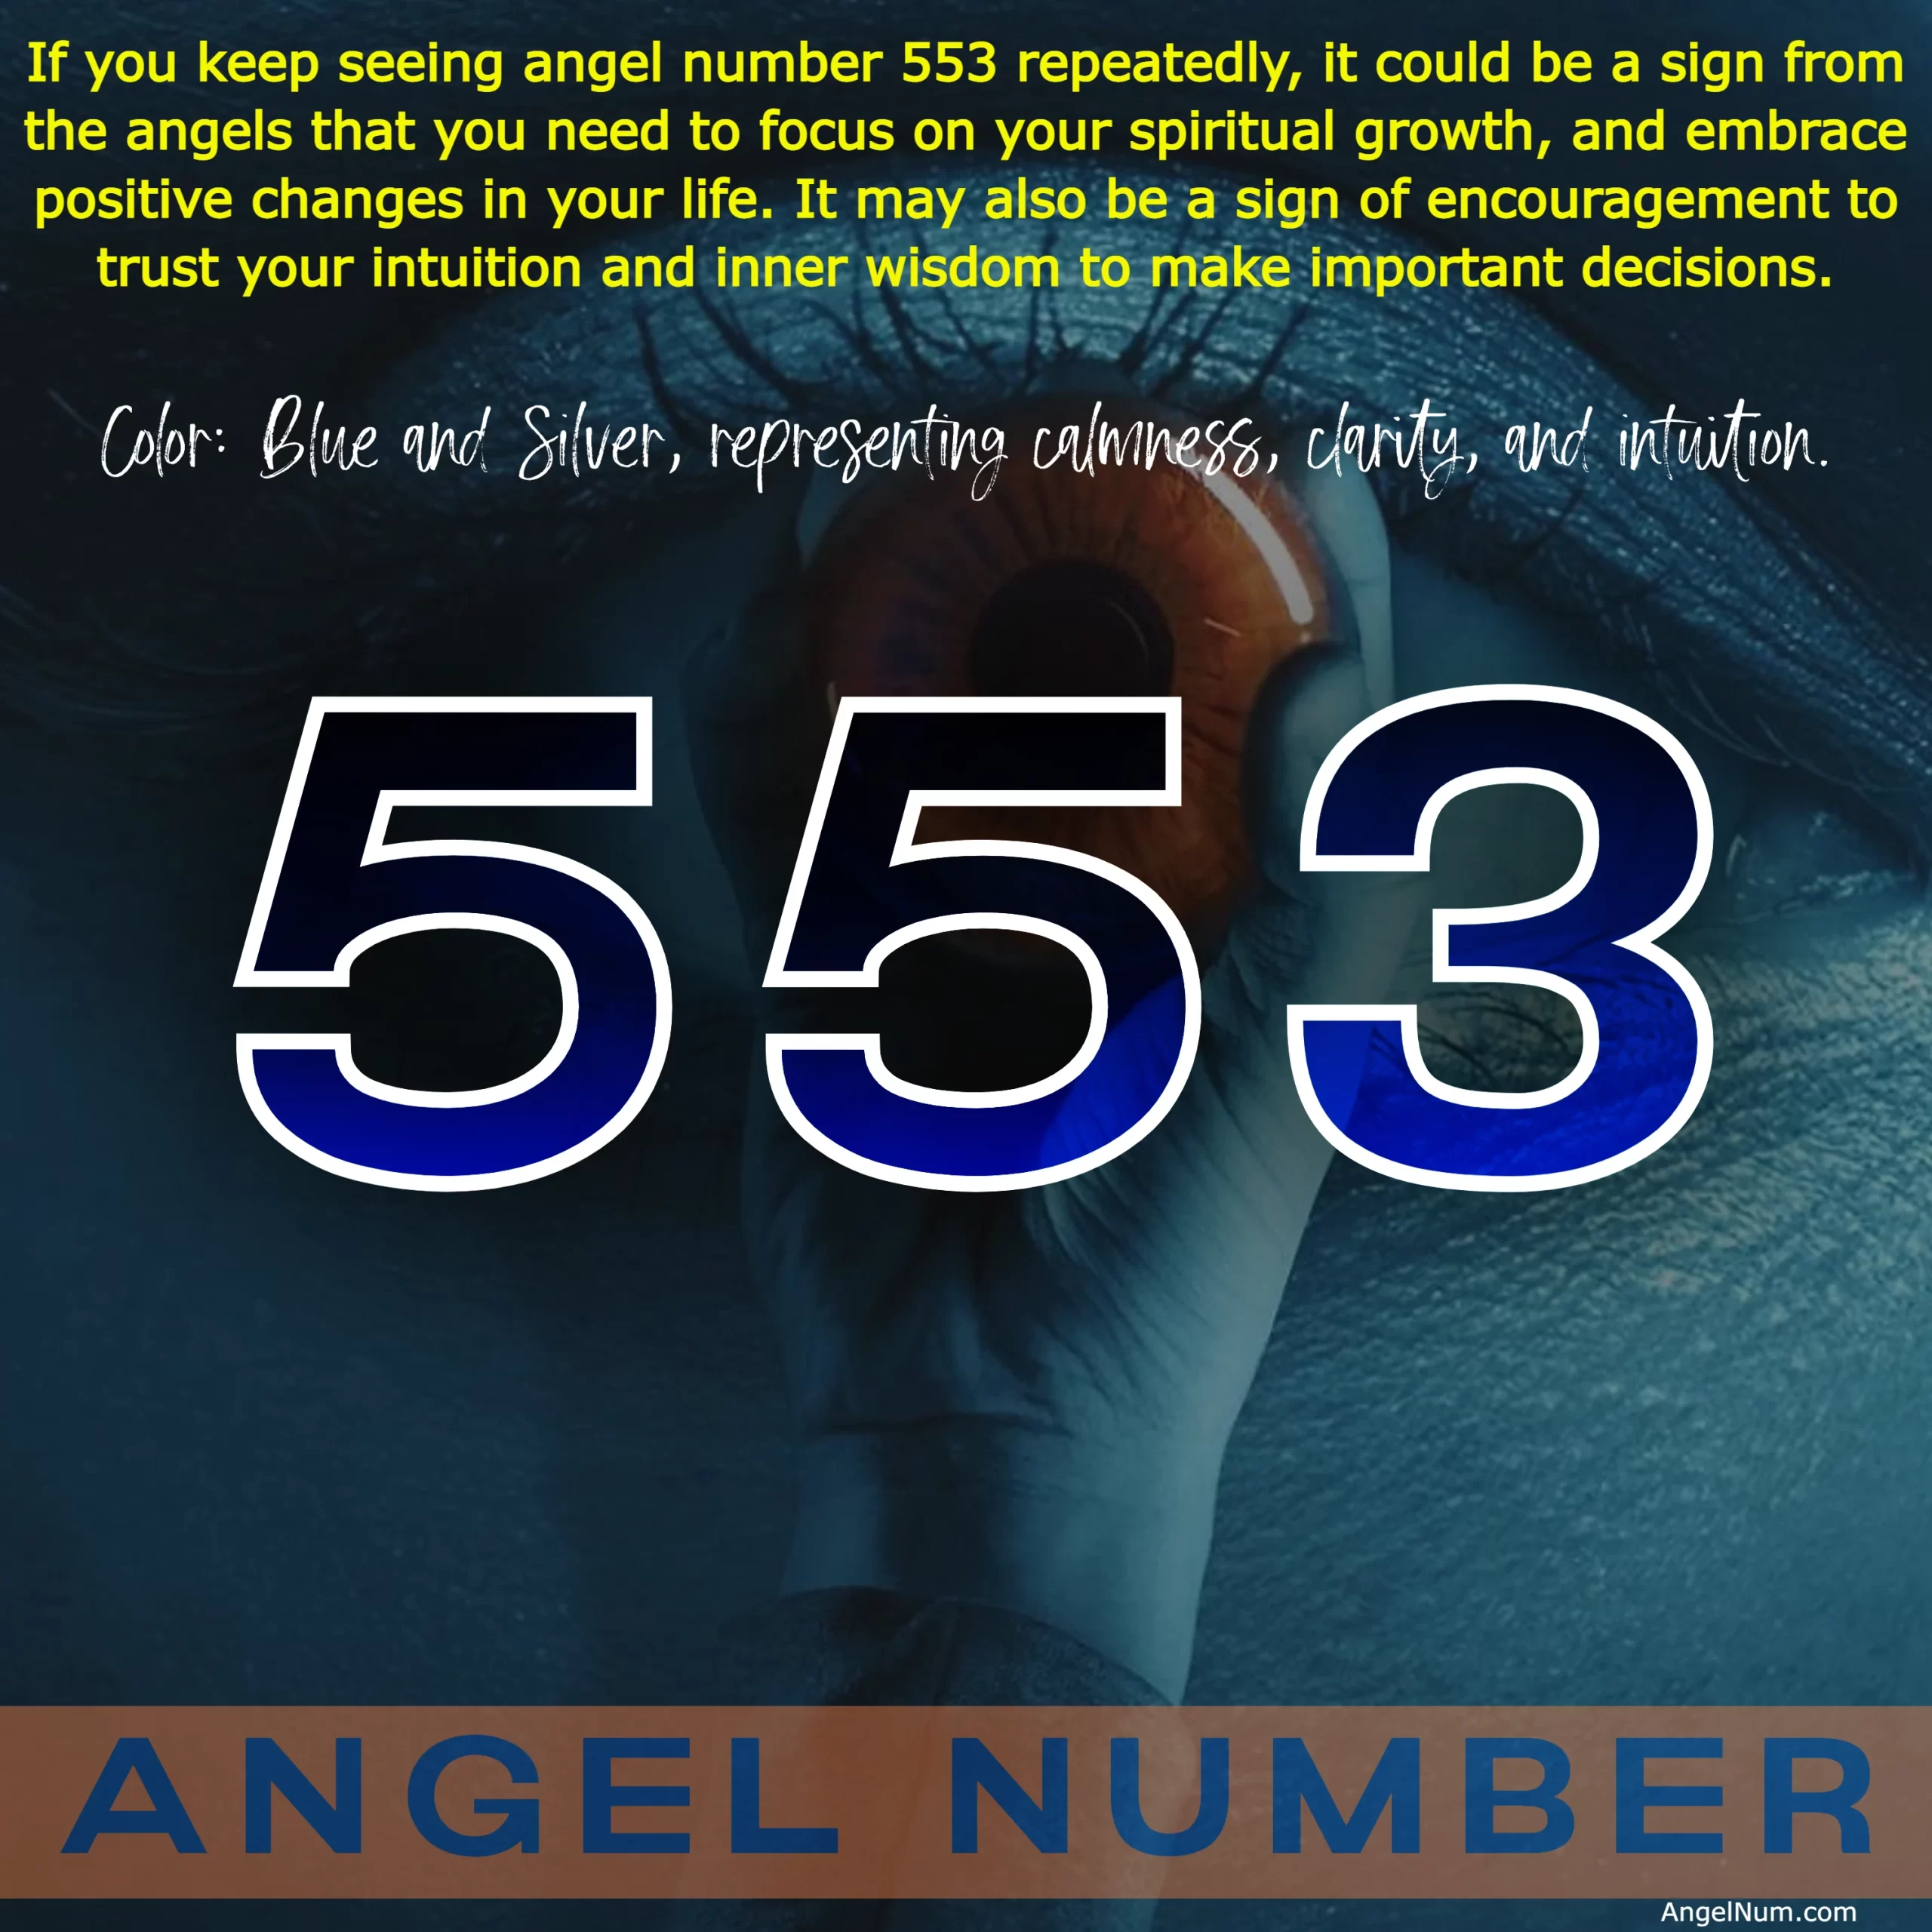 Angel Number 553: Spiritual Growth, Positive Change, and Trusting Intuition